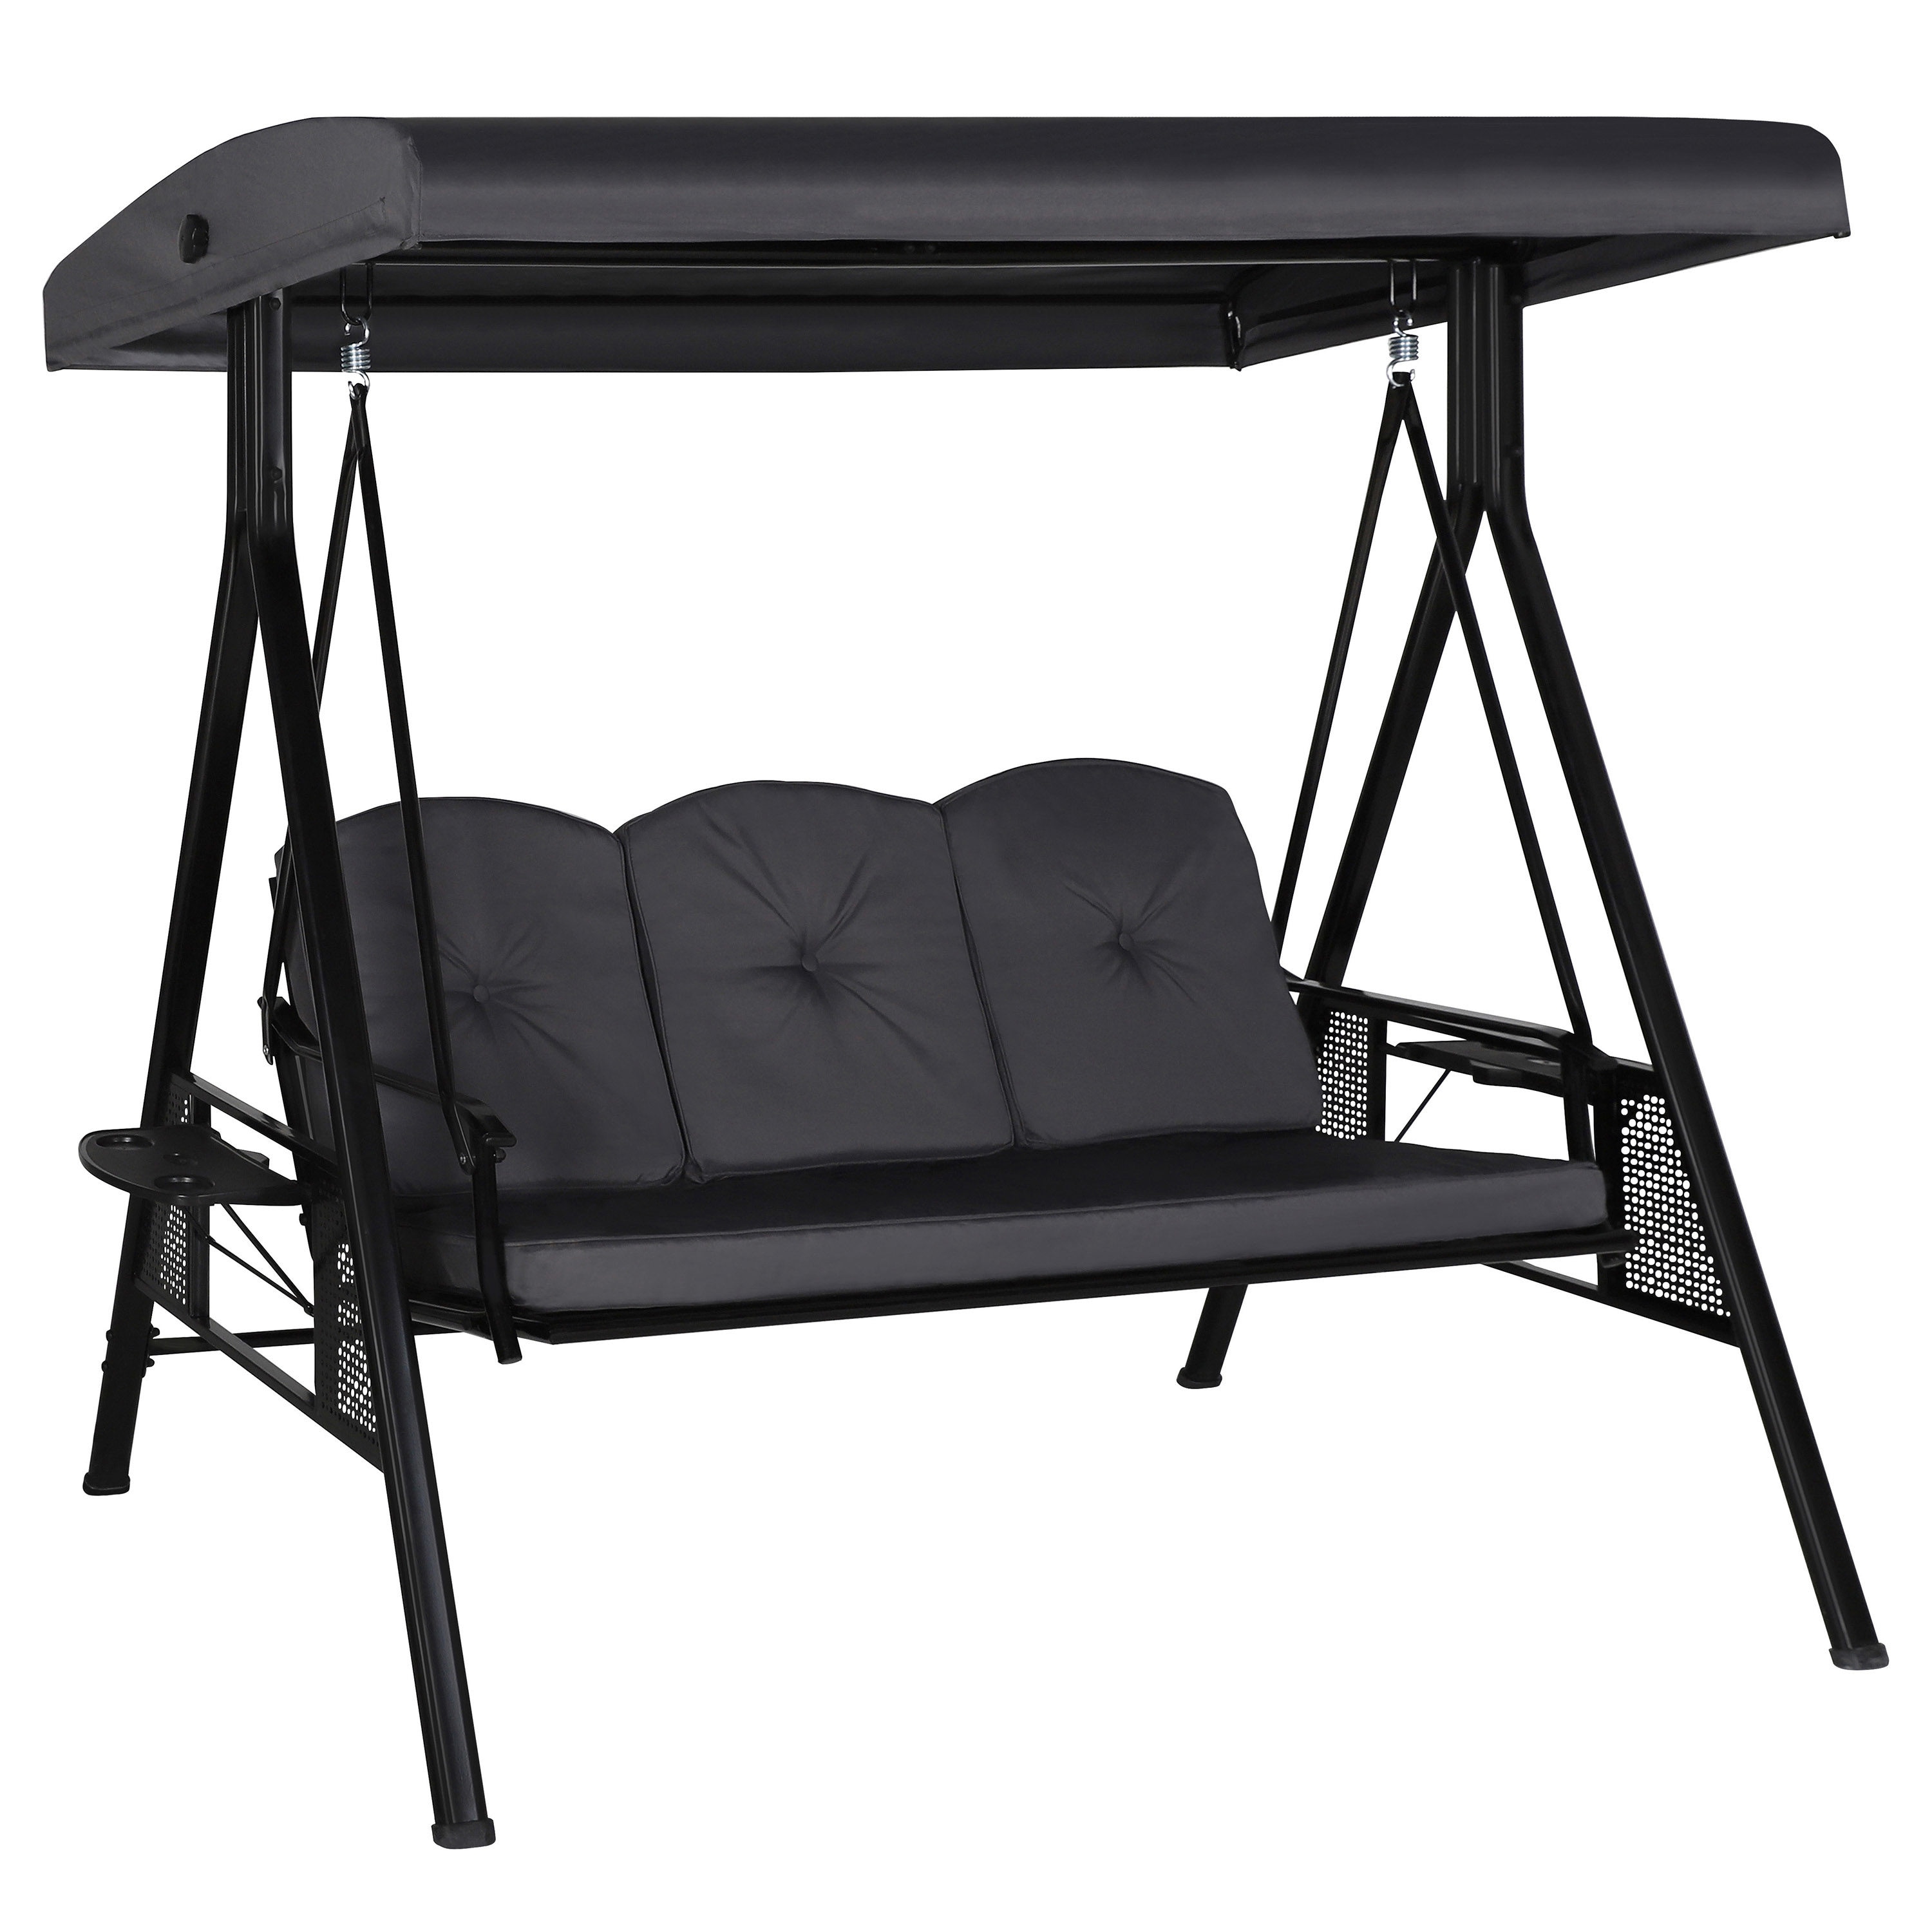 & at Gliders 3-person Porch the Gray VEIKOUS in Swings department Swing Steel Outdoor